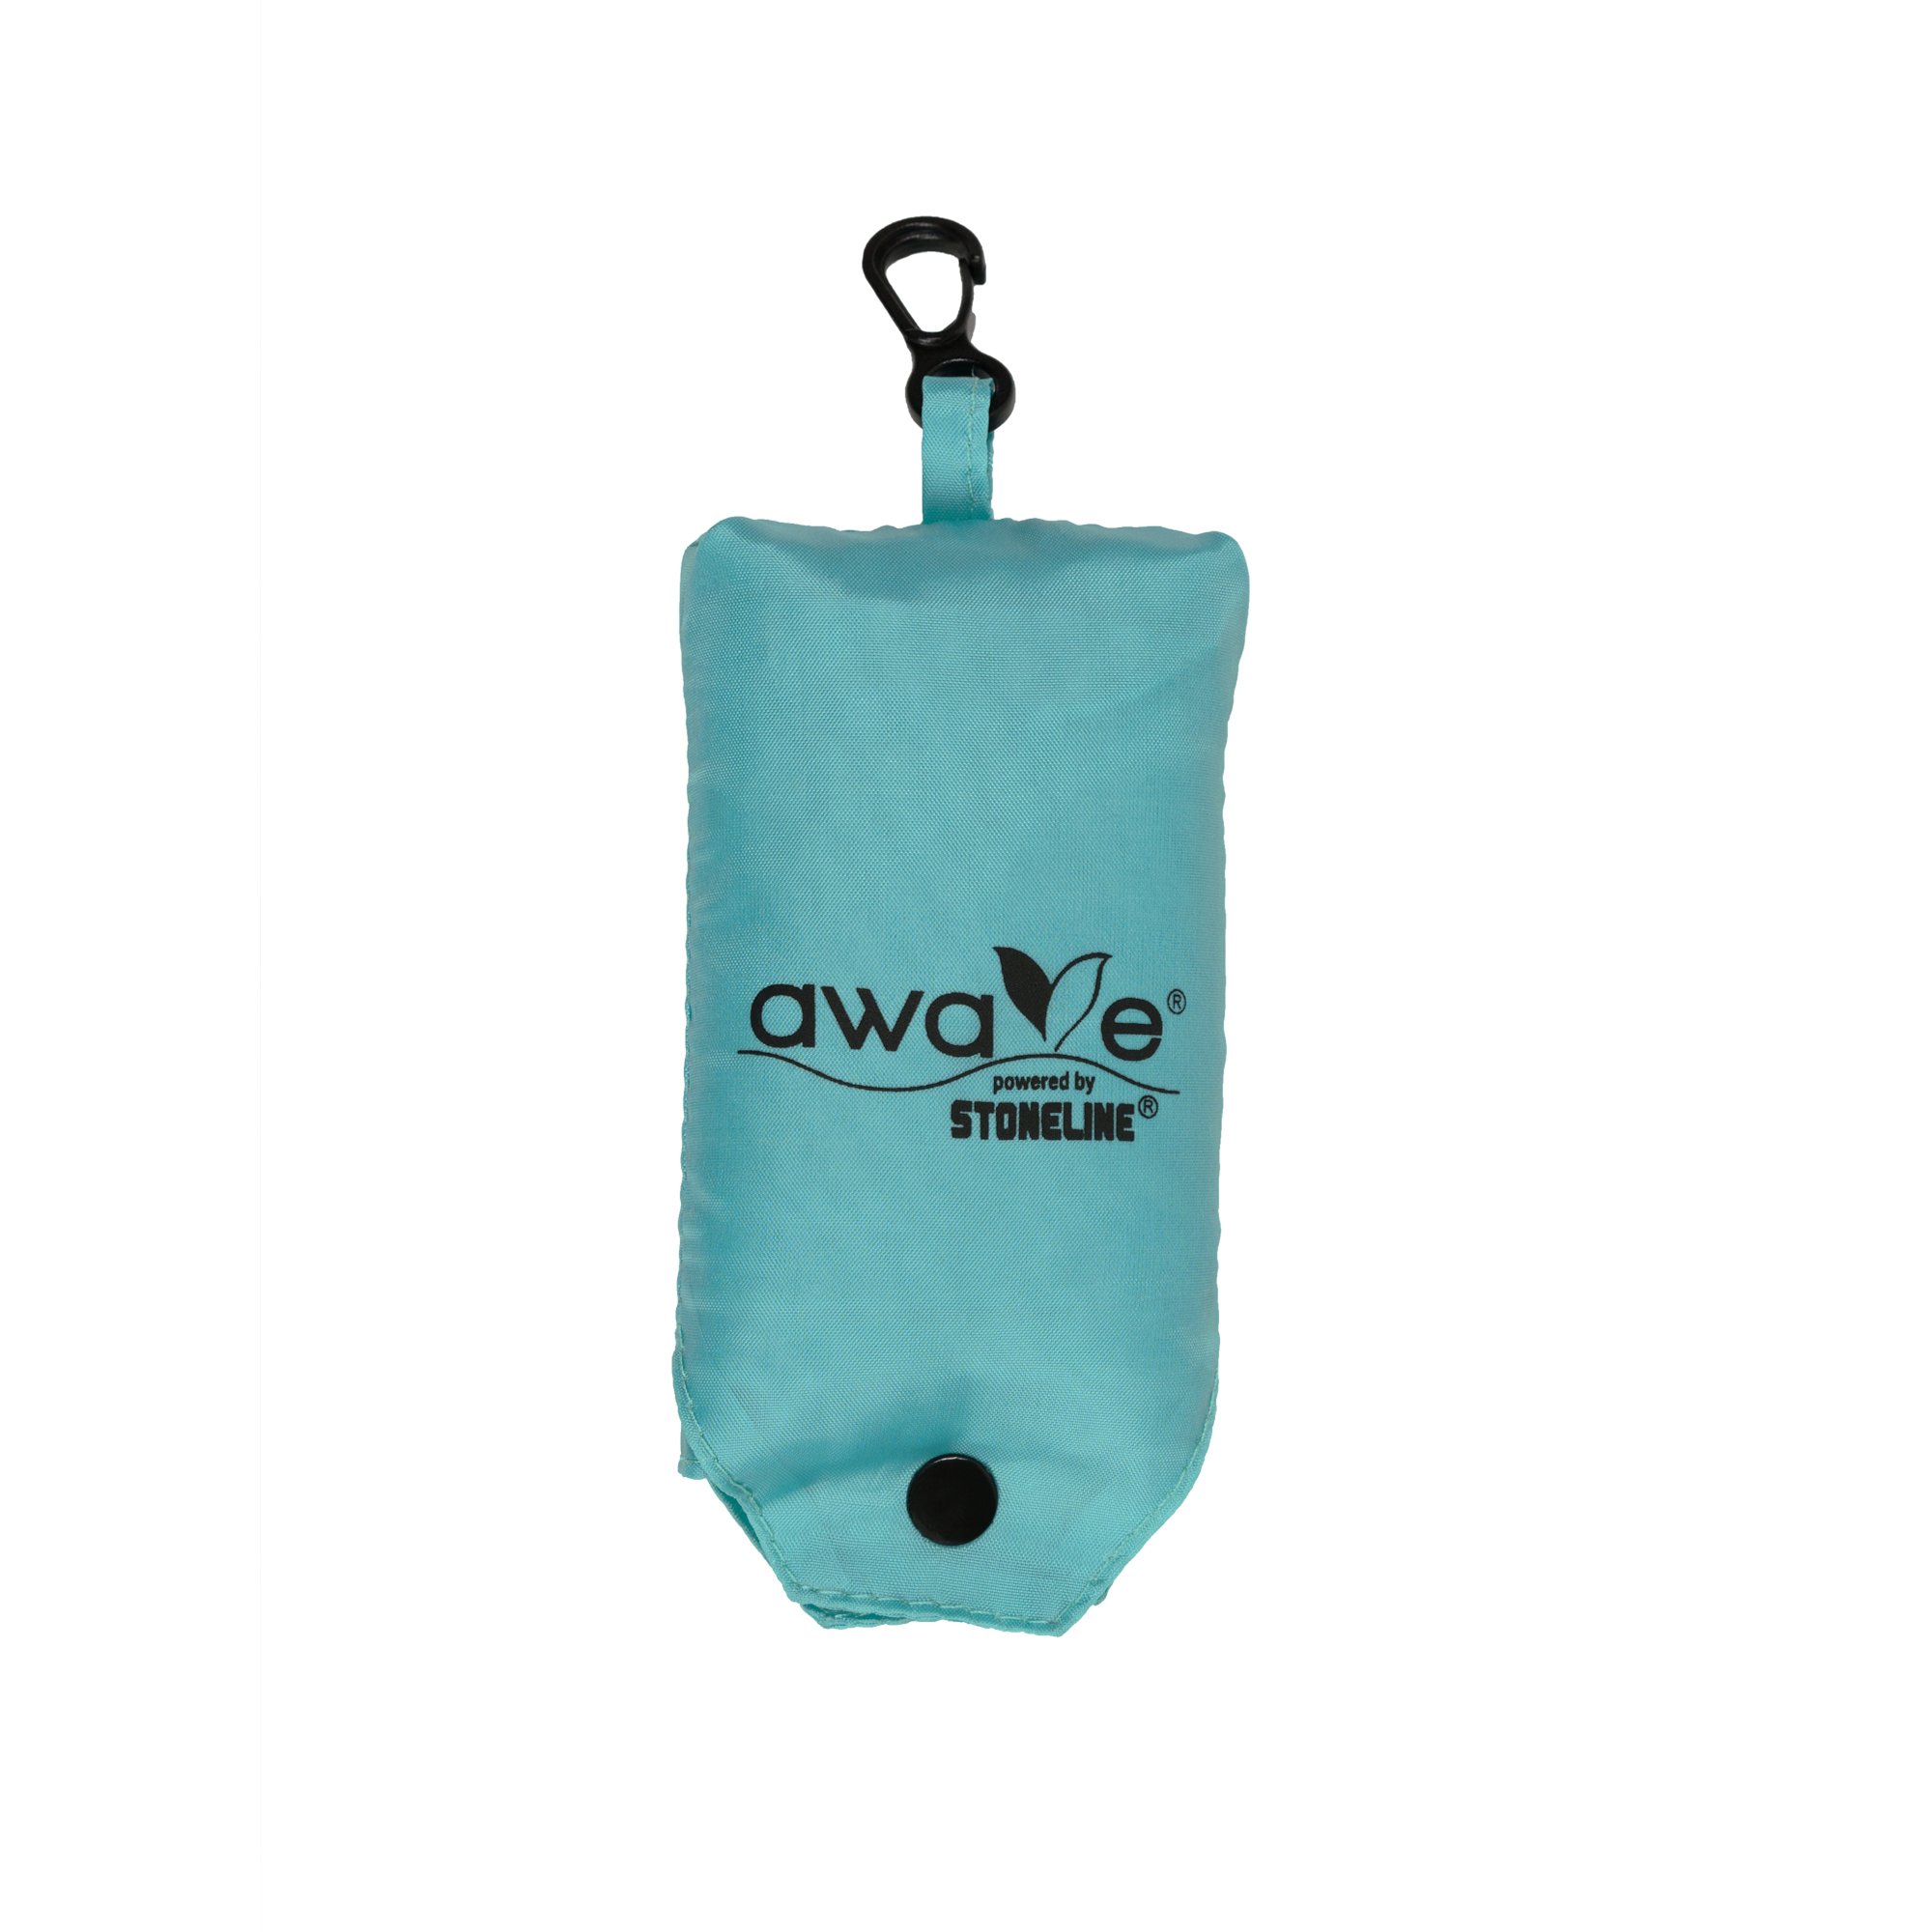 AWAVE® Foldable Shopping Bag, Made from rPET, Reusable | turquoise